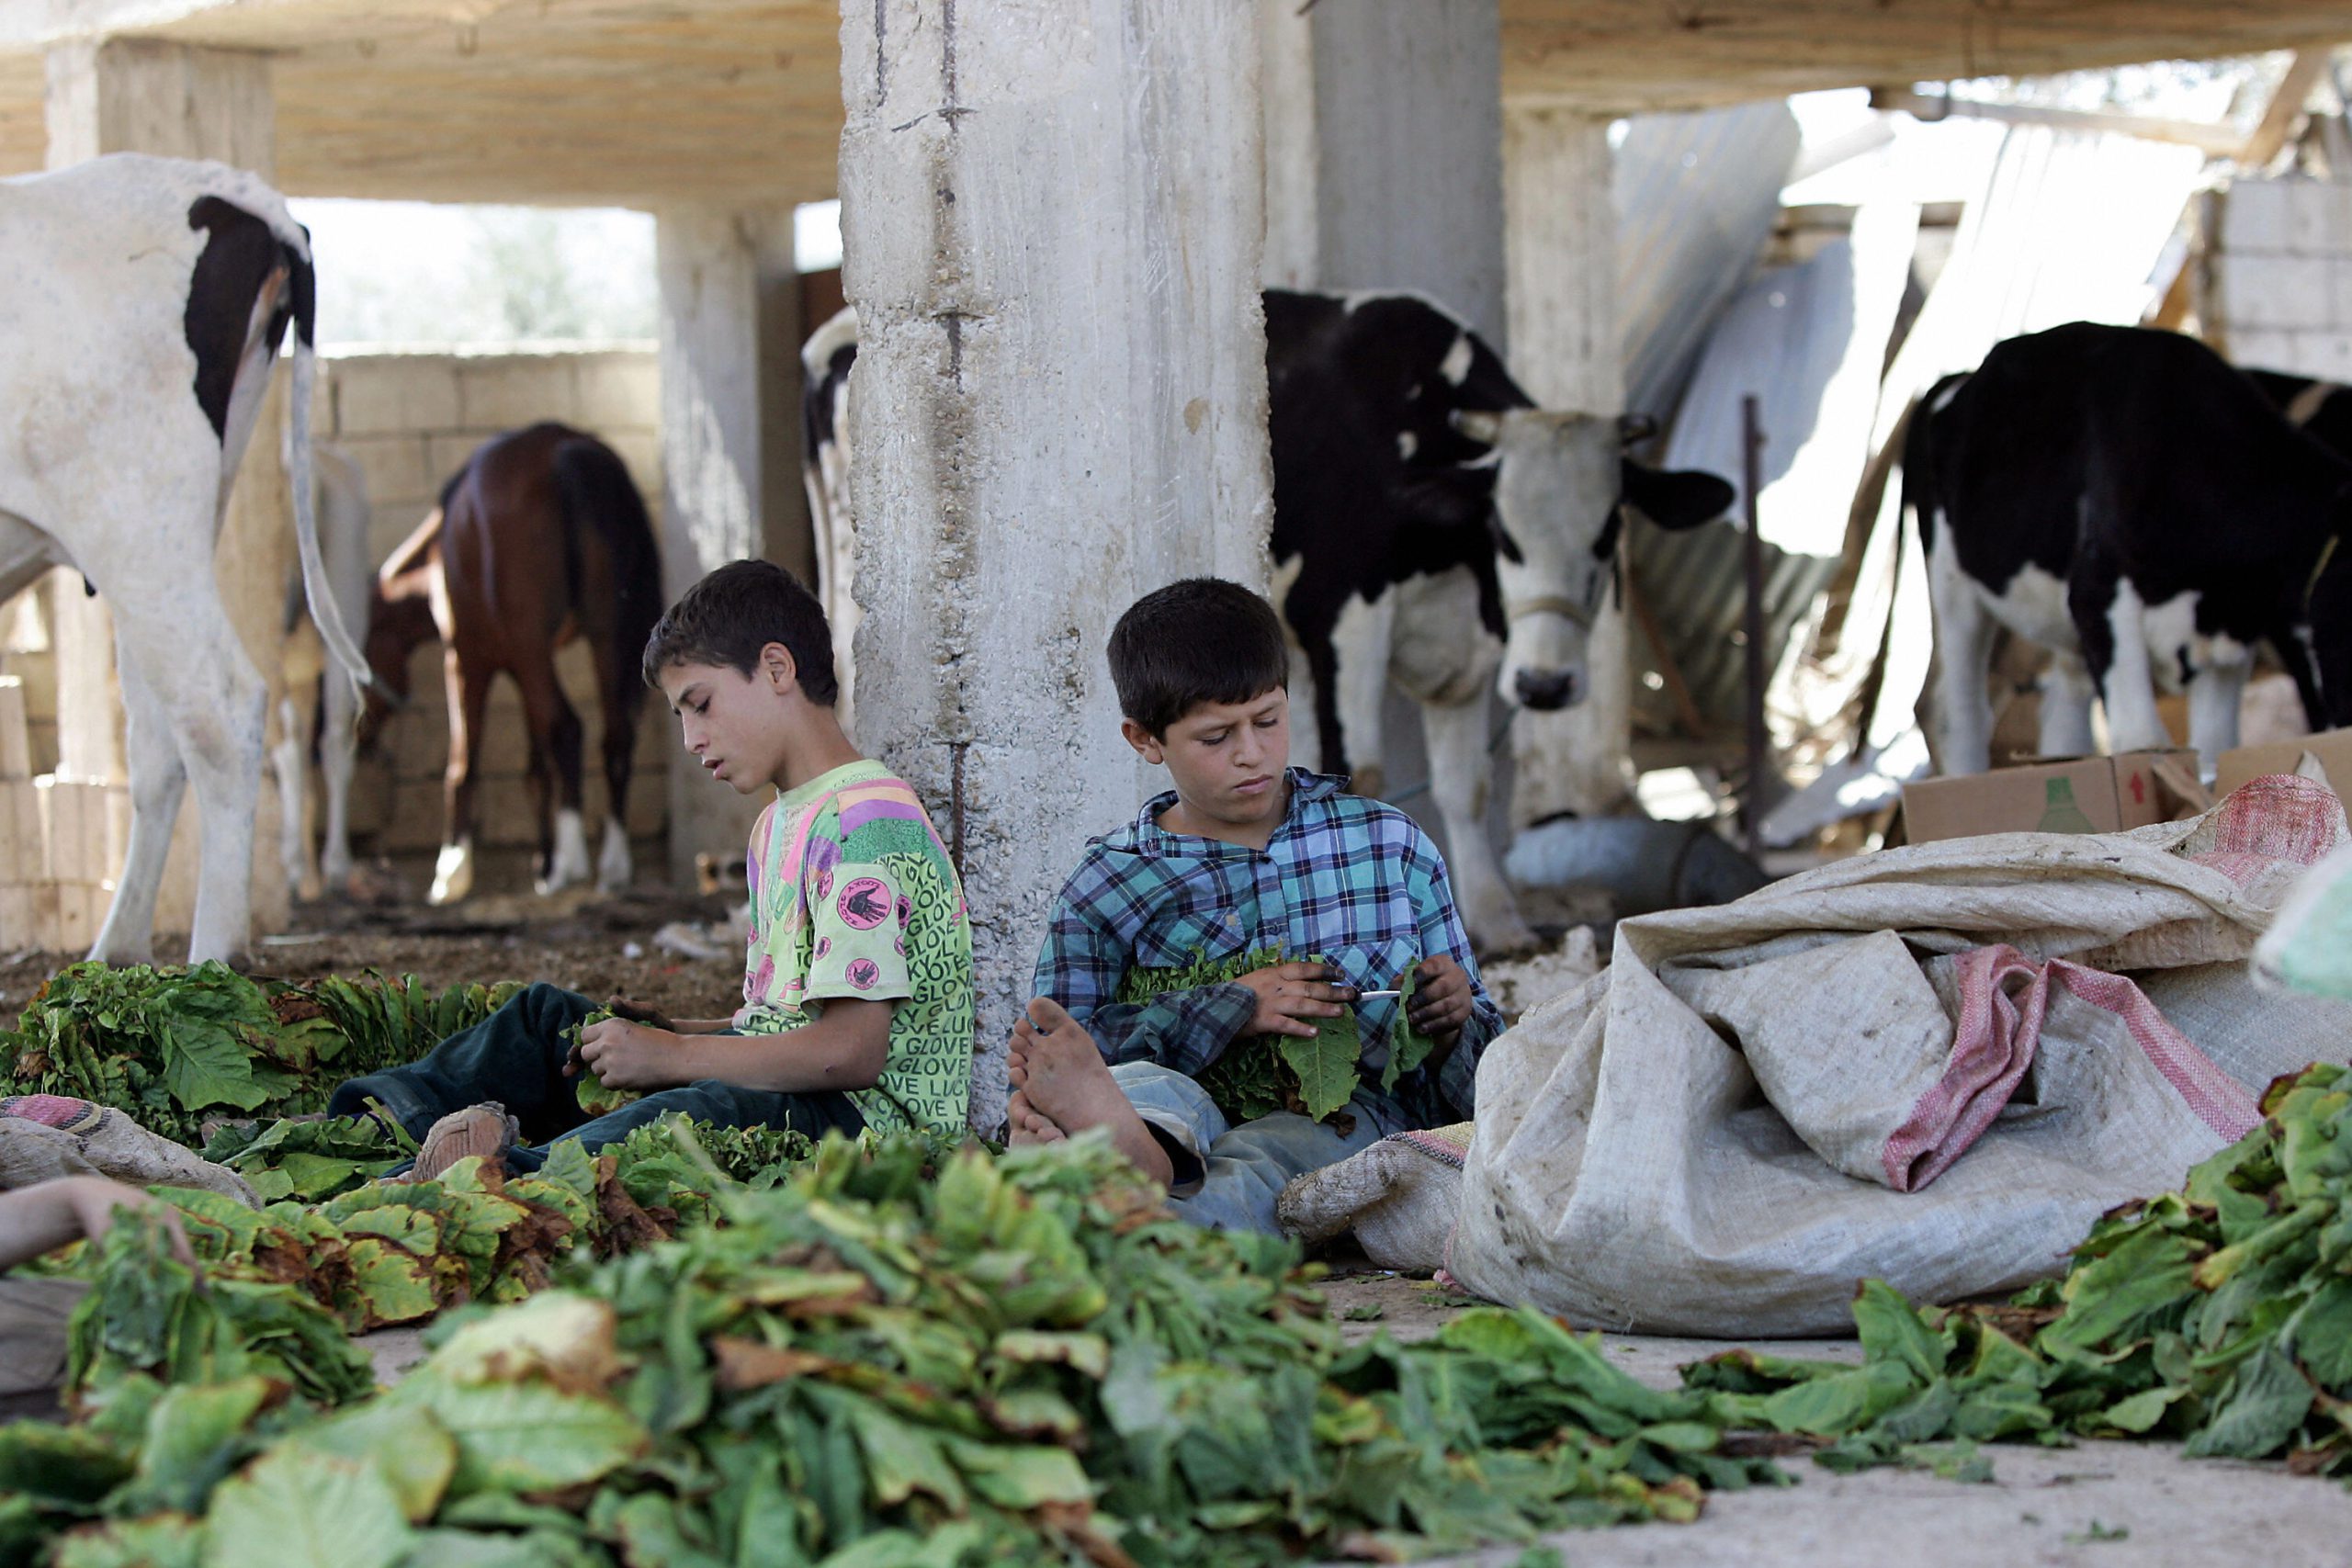 Lebanese boys collect tobacco leaves as